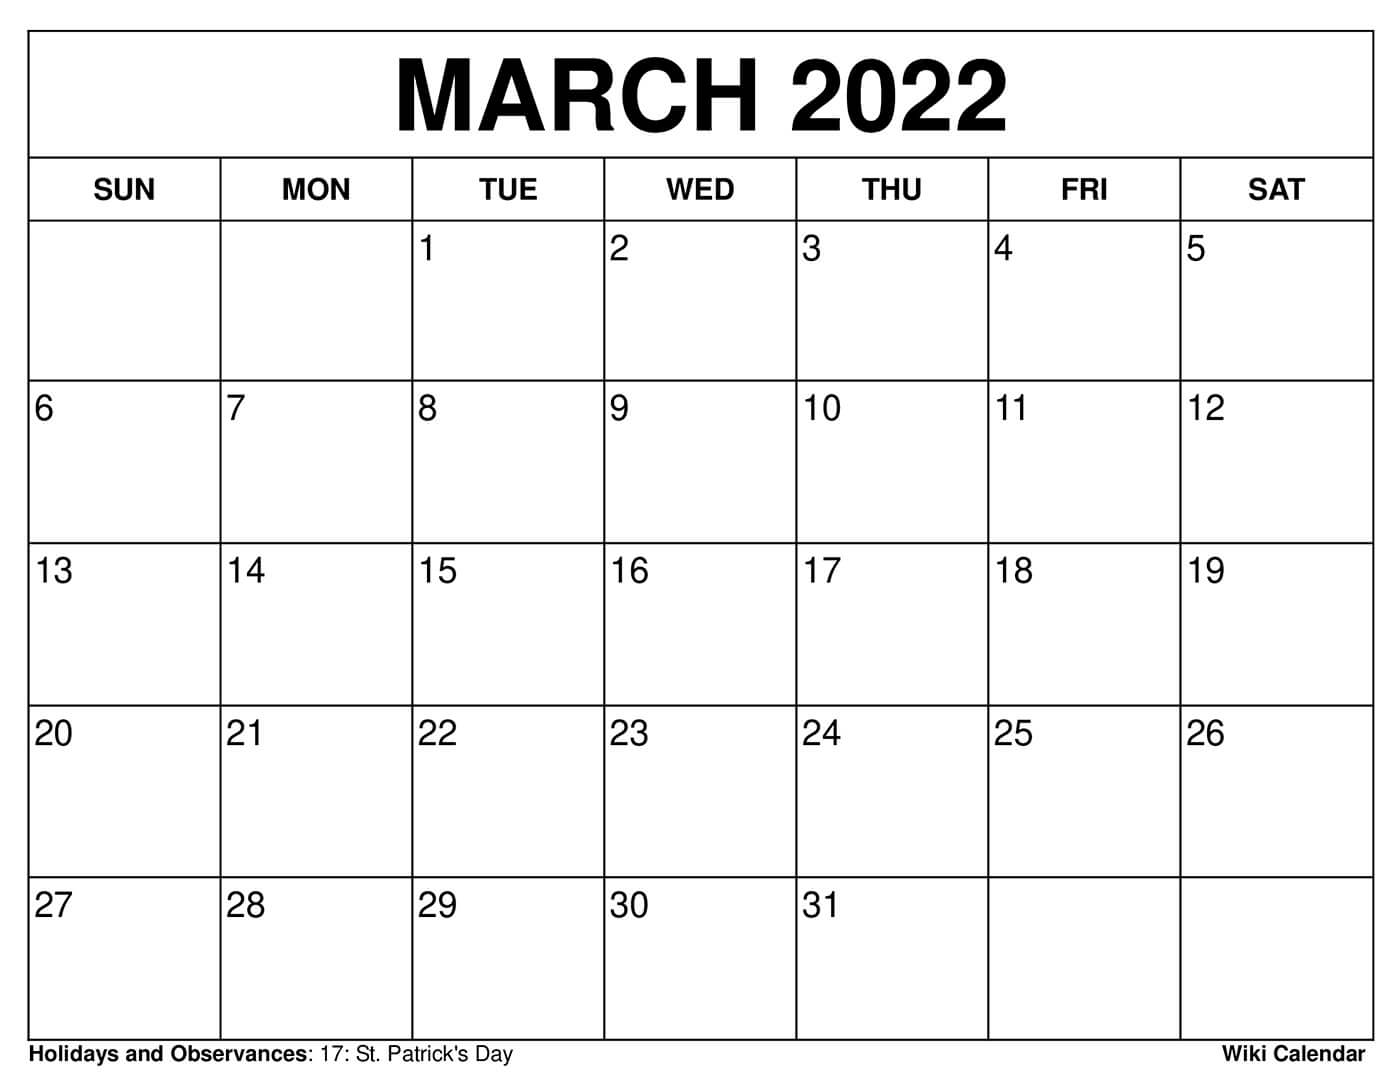 March 2022 Calendar With Holidays Free Printable March 2022 Calendars - Wiki Calendar